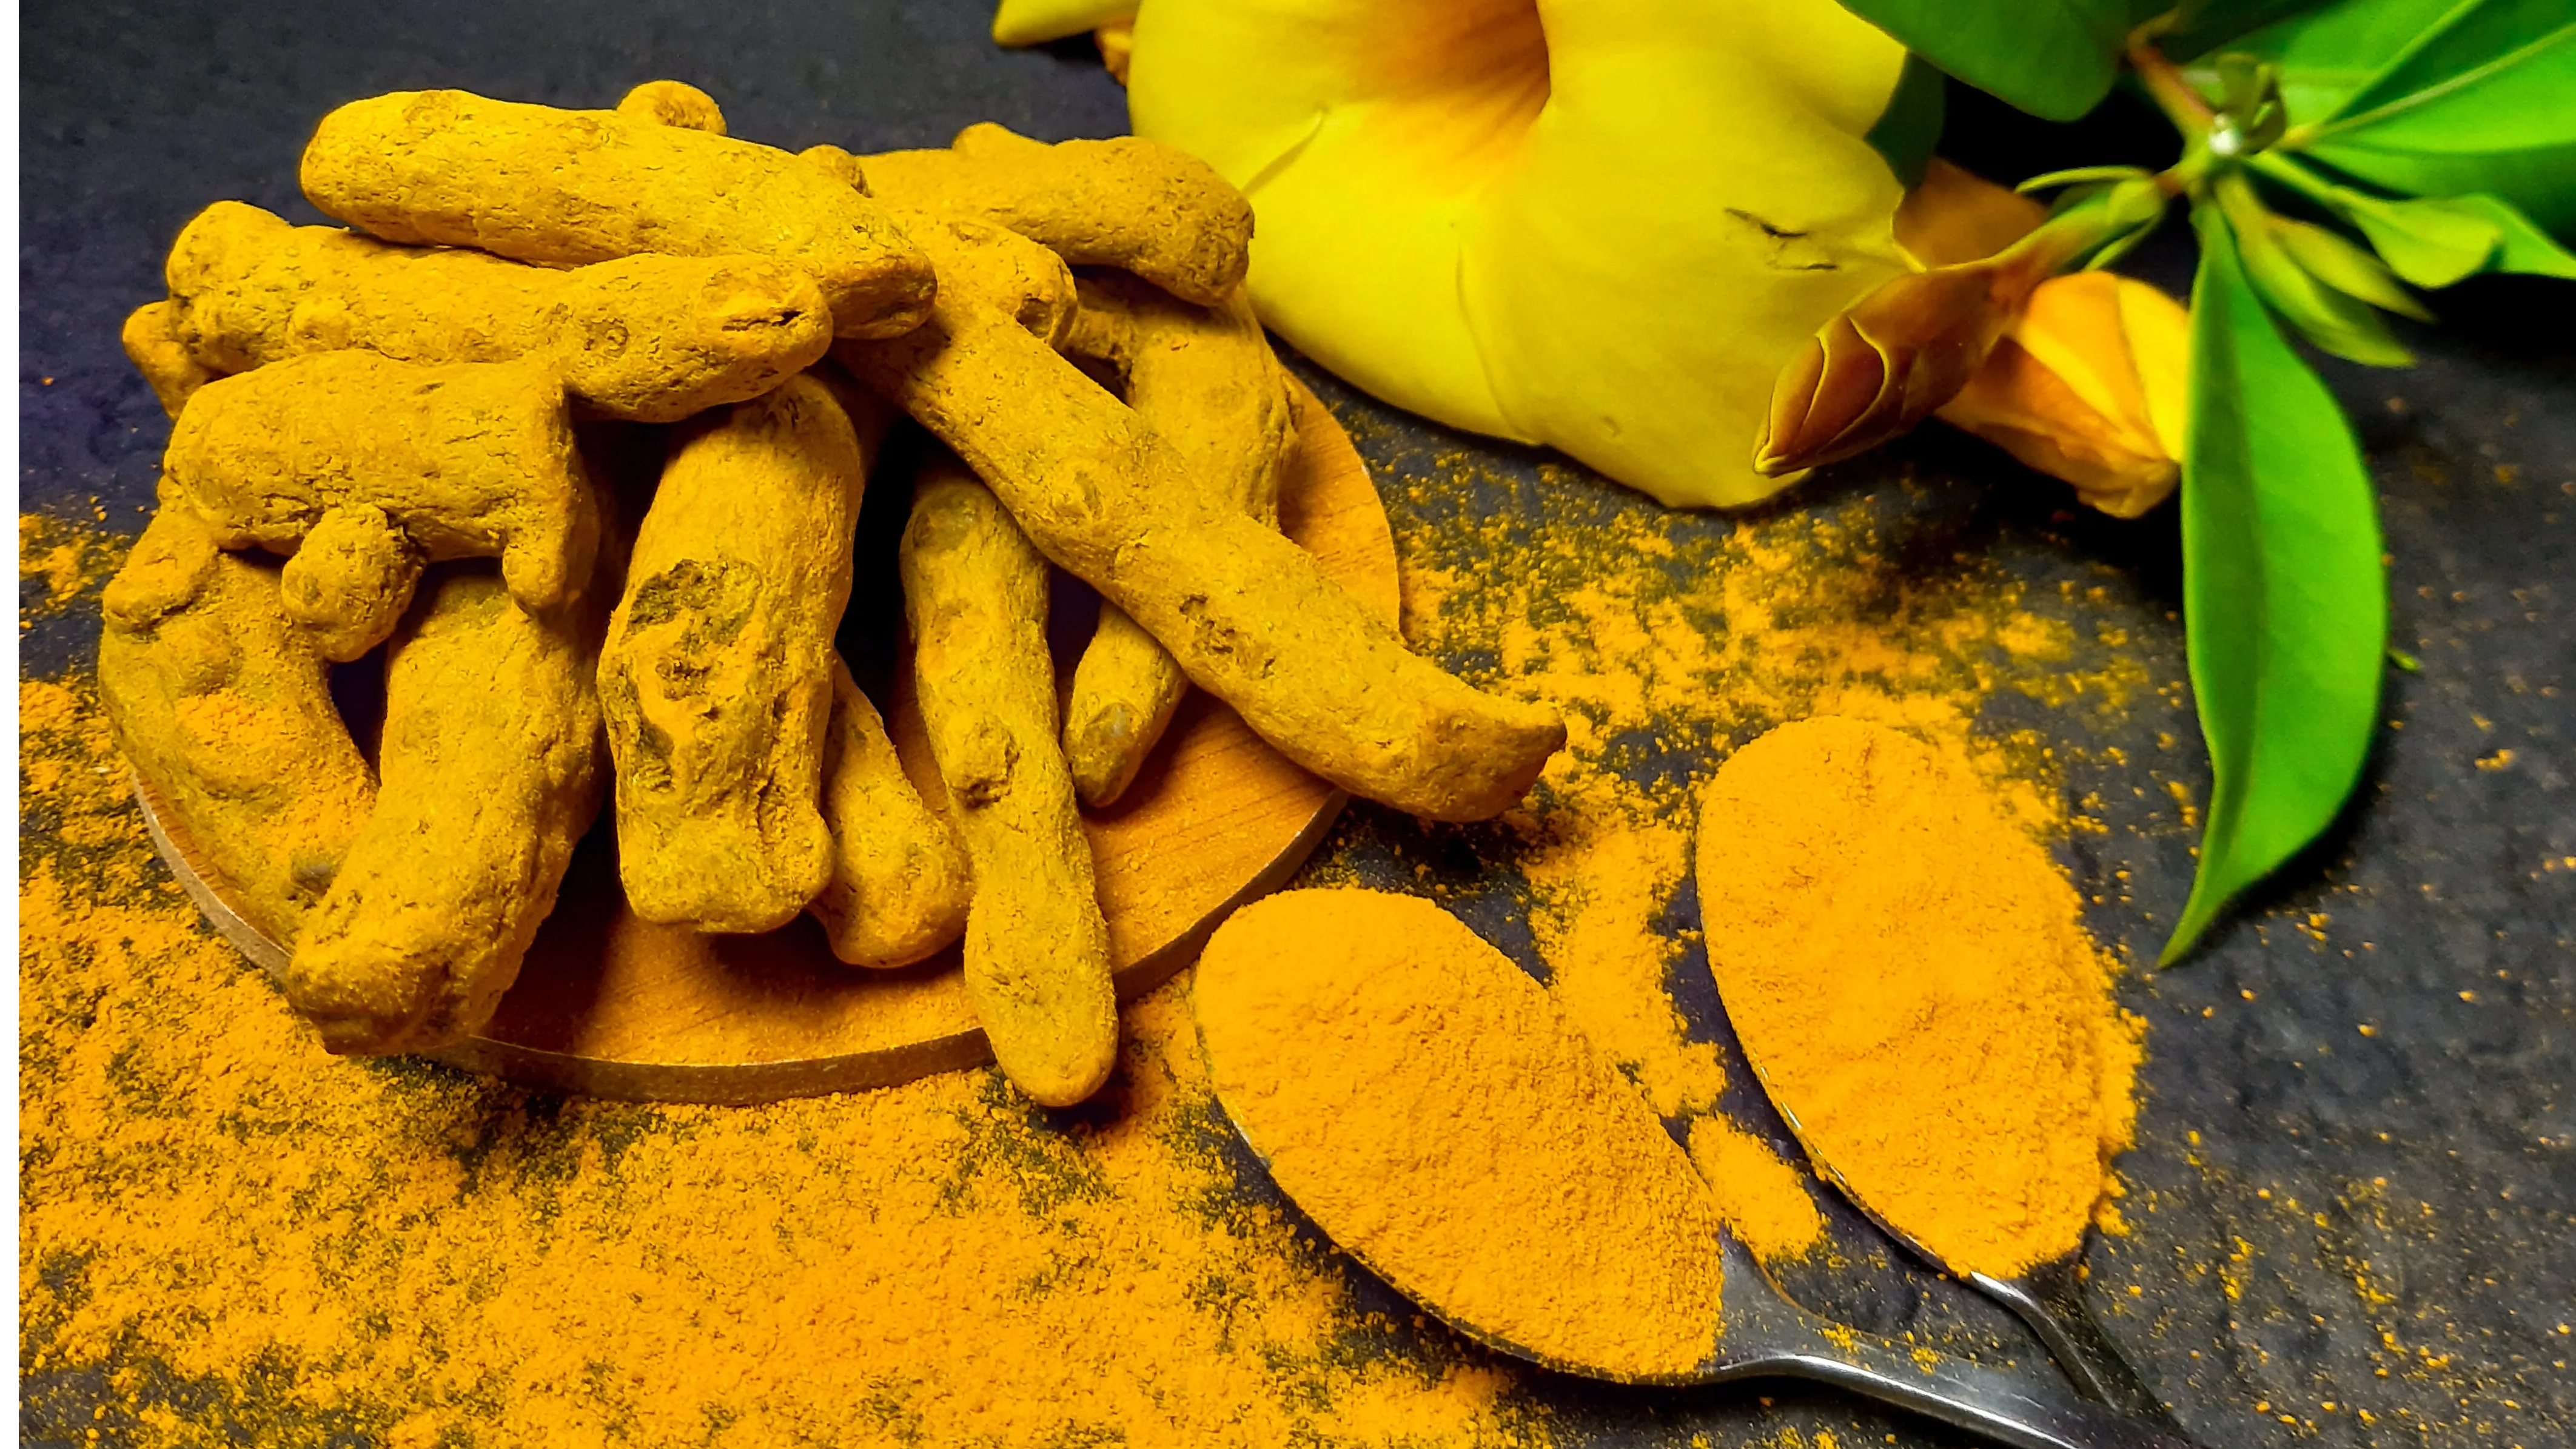 5 reasons why turmeric is a magic ingredient for your health on cold days. Check benefits you may not know